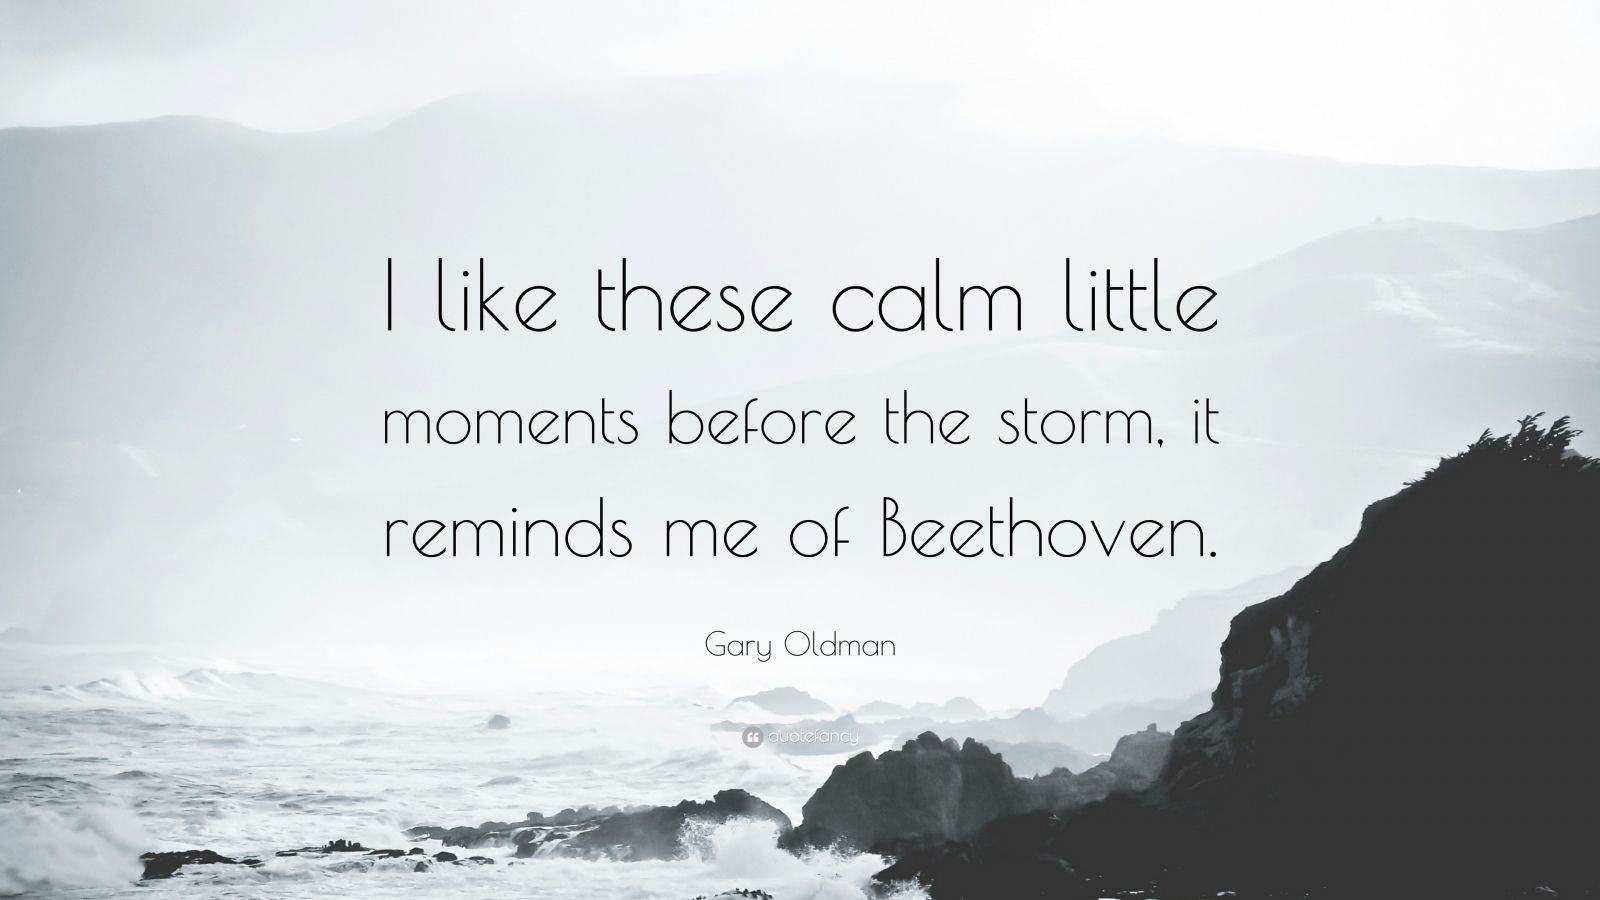 Gary Oldman Quote: “I like these calm little moments before the storm, it reminds me of Beethoven.” (12 wallpaper)